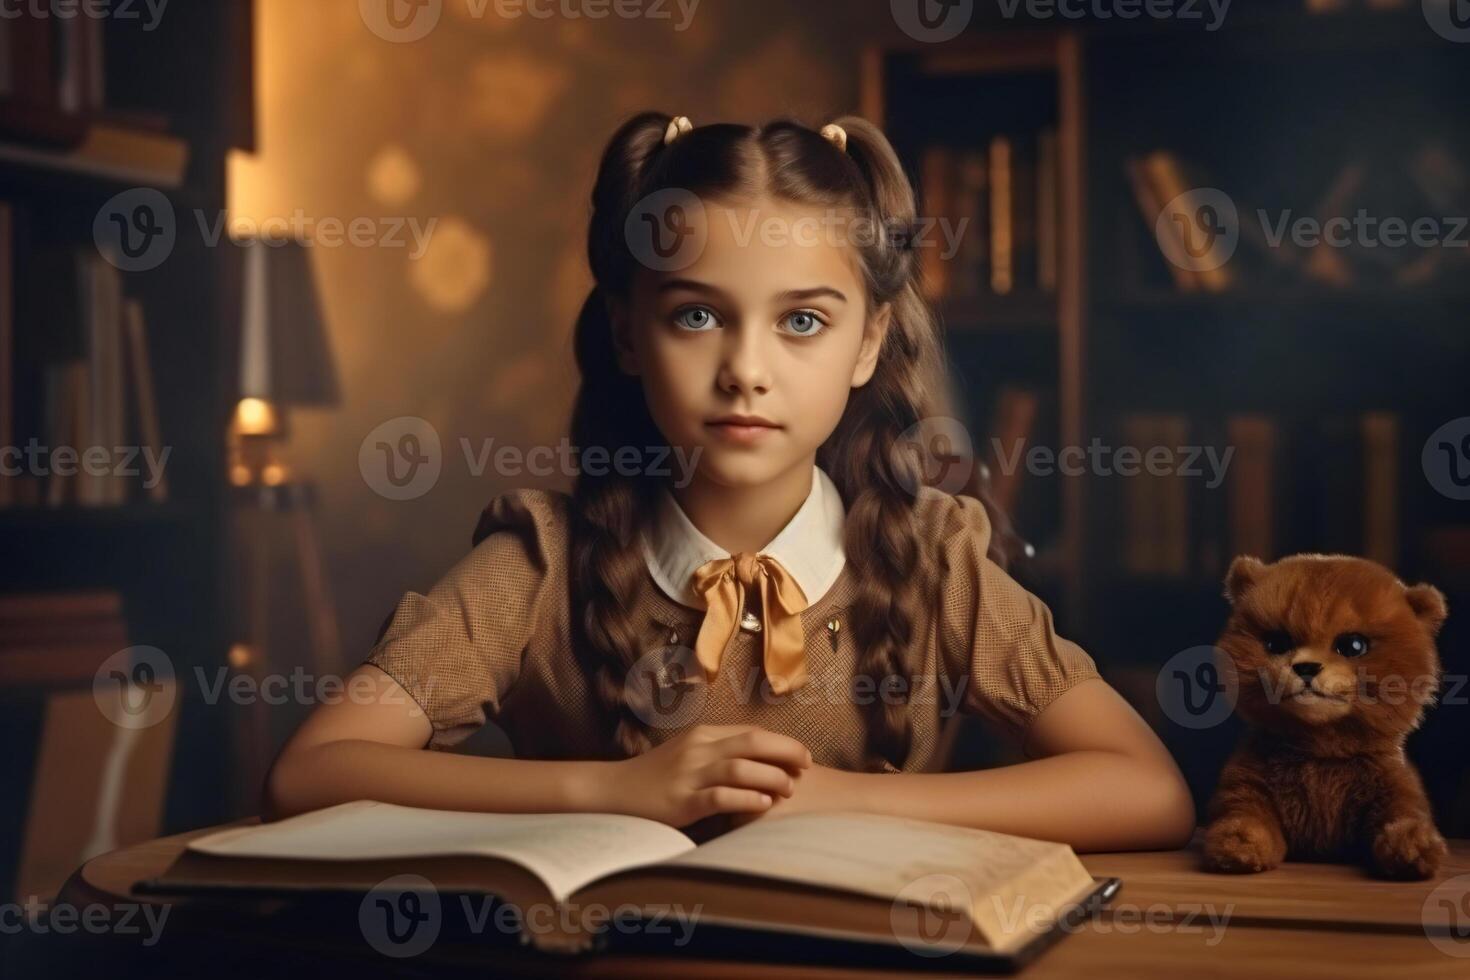 Free photo back to school. cute child schoolgirl sitting at a desk in a room made with